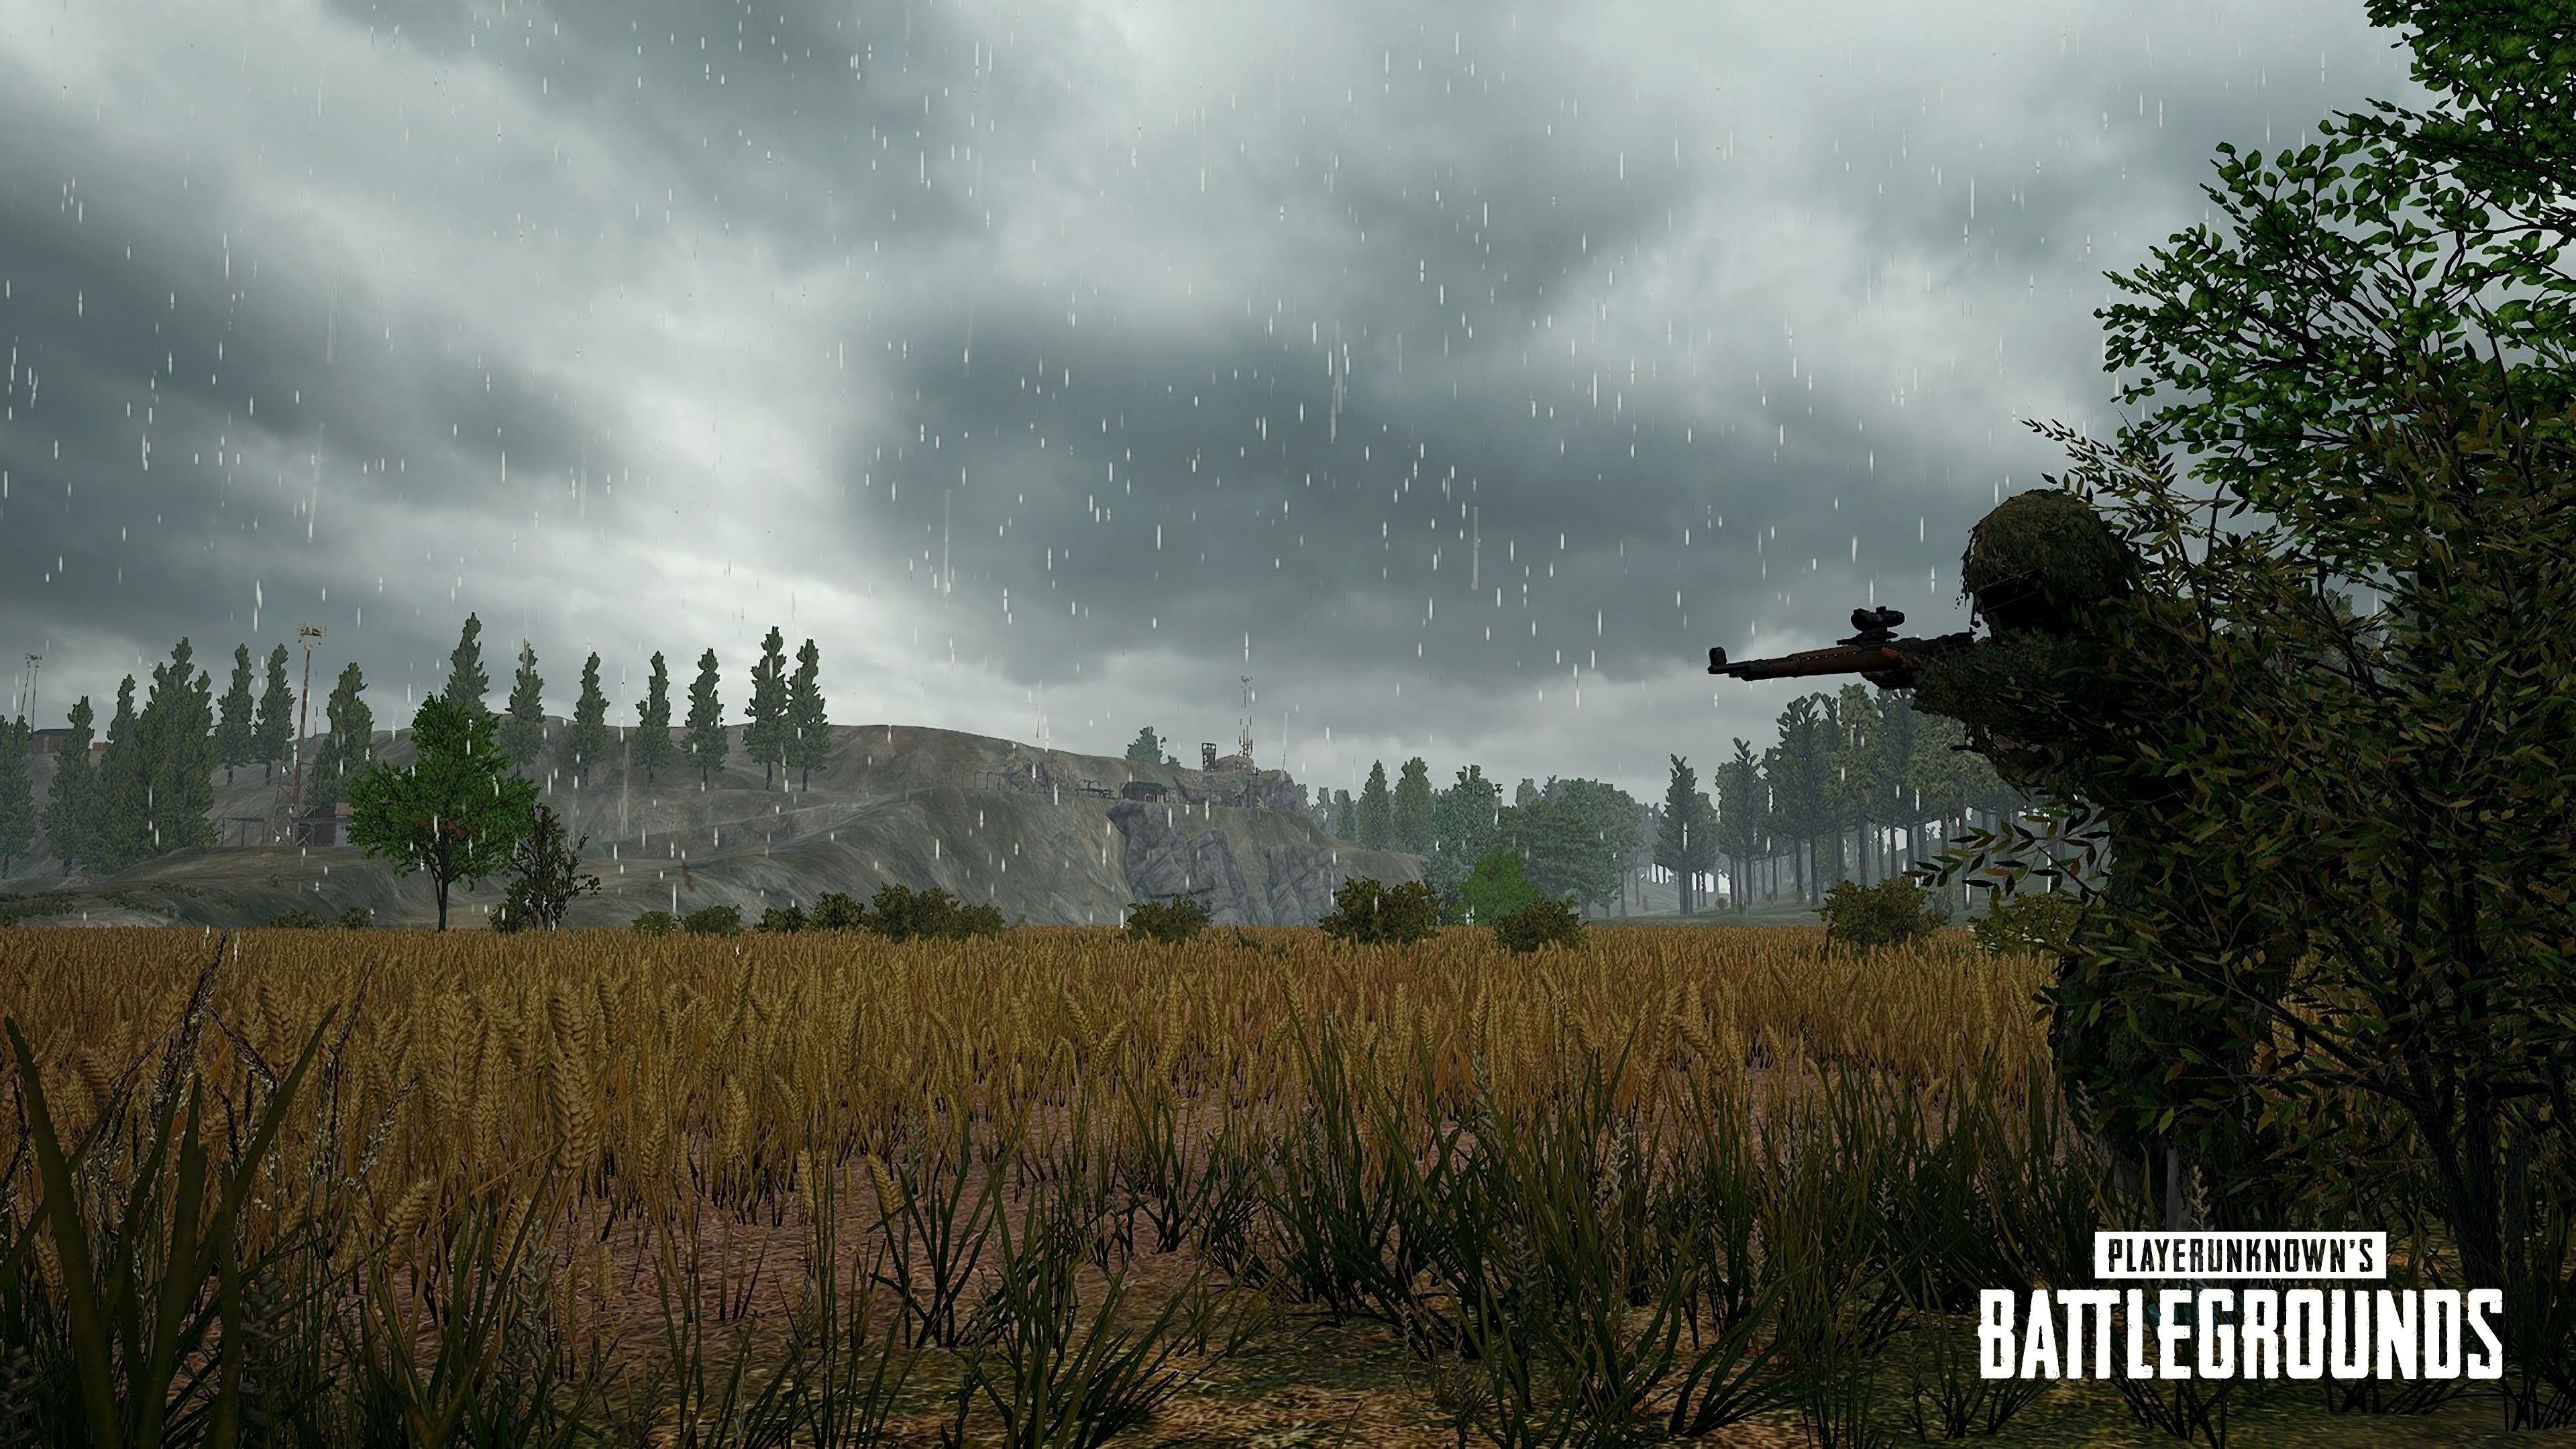 PUBG PlayerUnknown's Awm Man Battlegrounds 4K Wallpaper PlayerUnknown's Battlegrounds (PUBG) 4k wa. Battle royale game, 4k wallpaper for pc, Video game companies